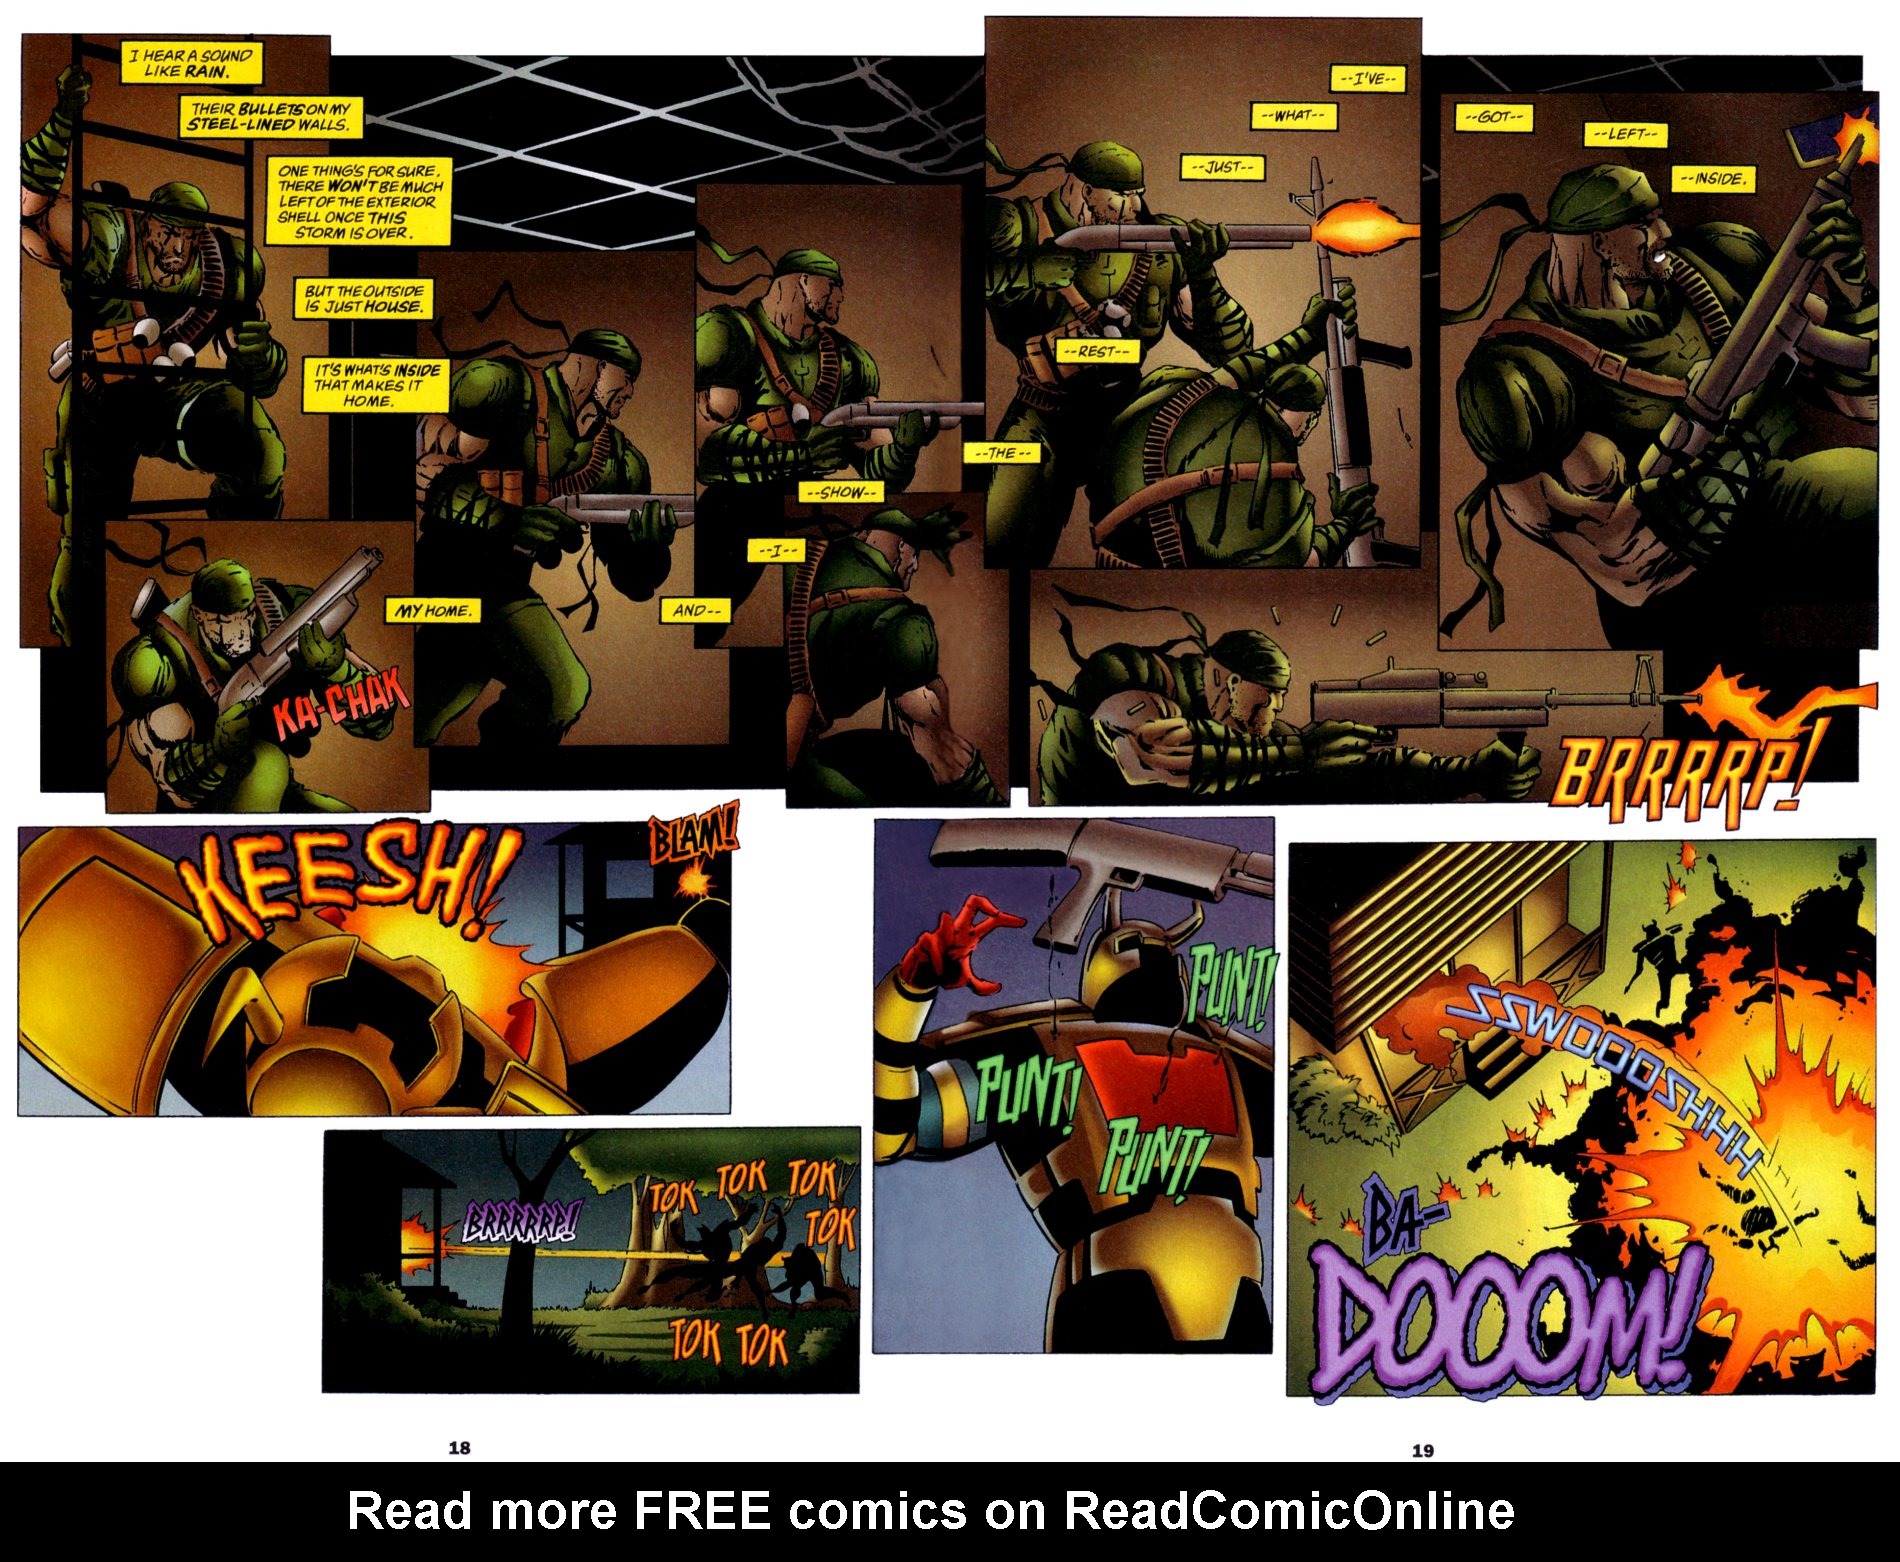 Read online Deathblow comic -  Issue #16 - 18